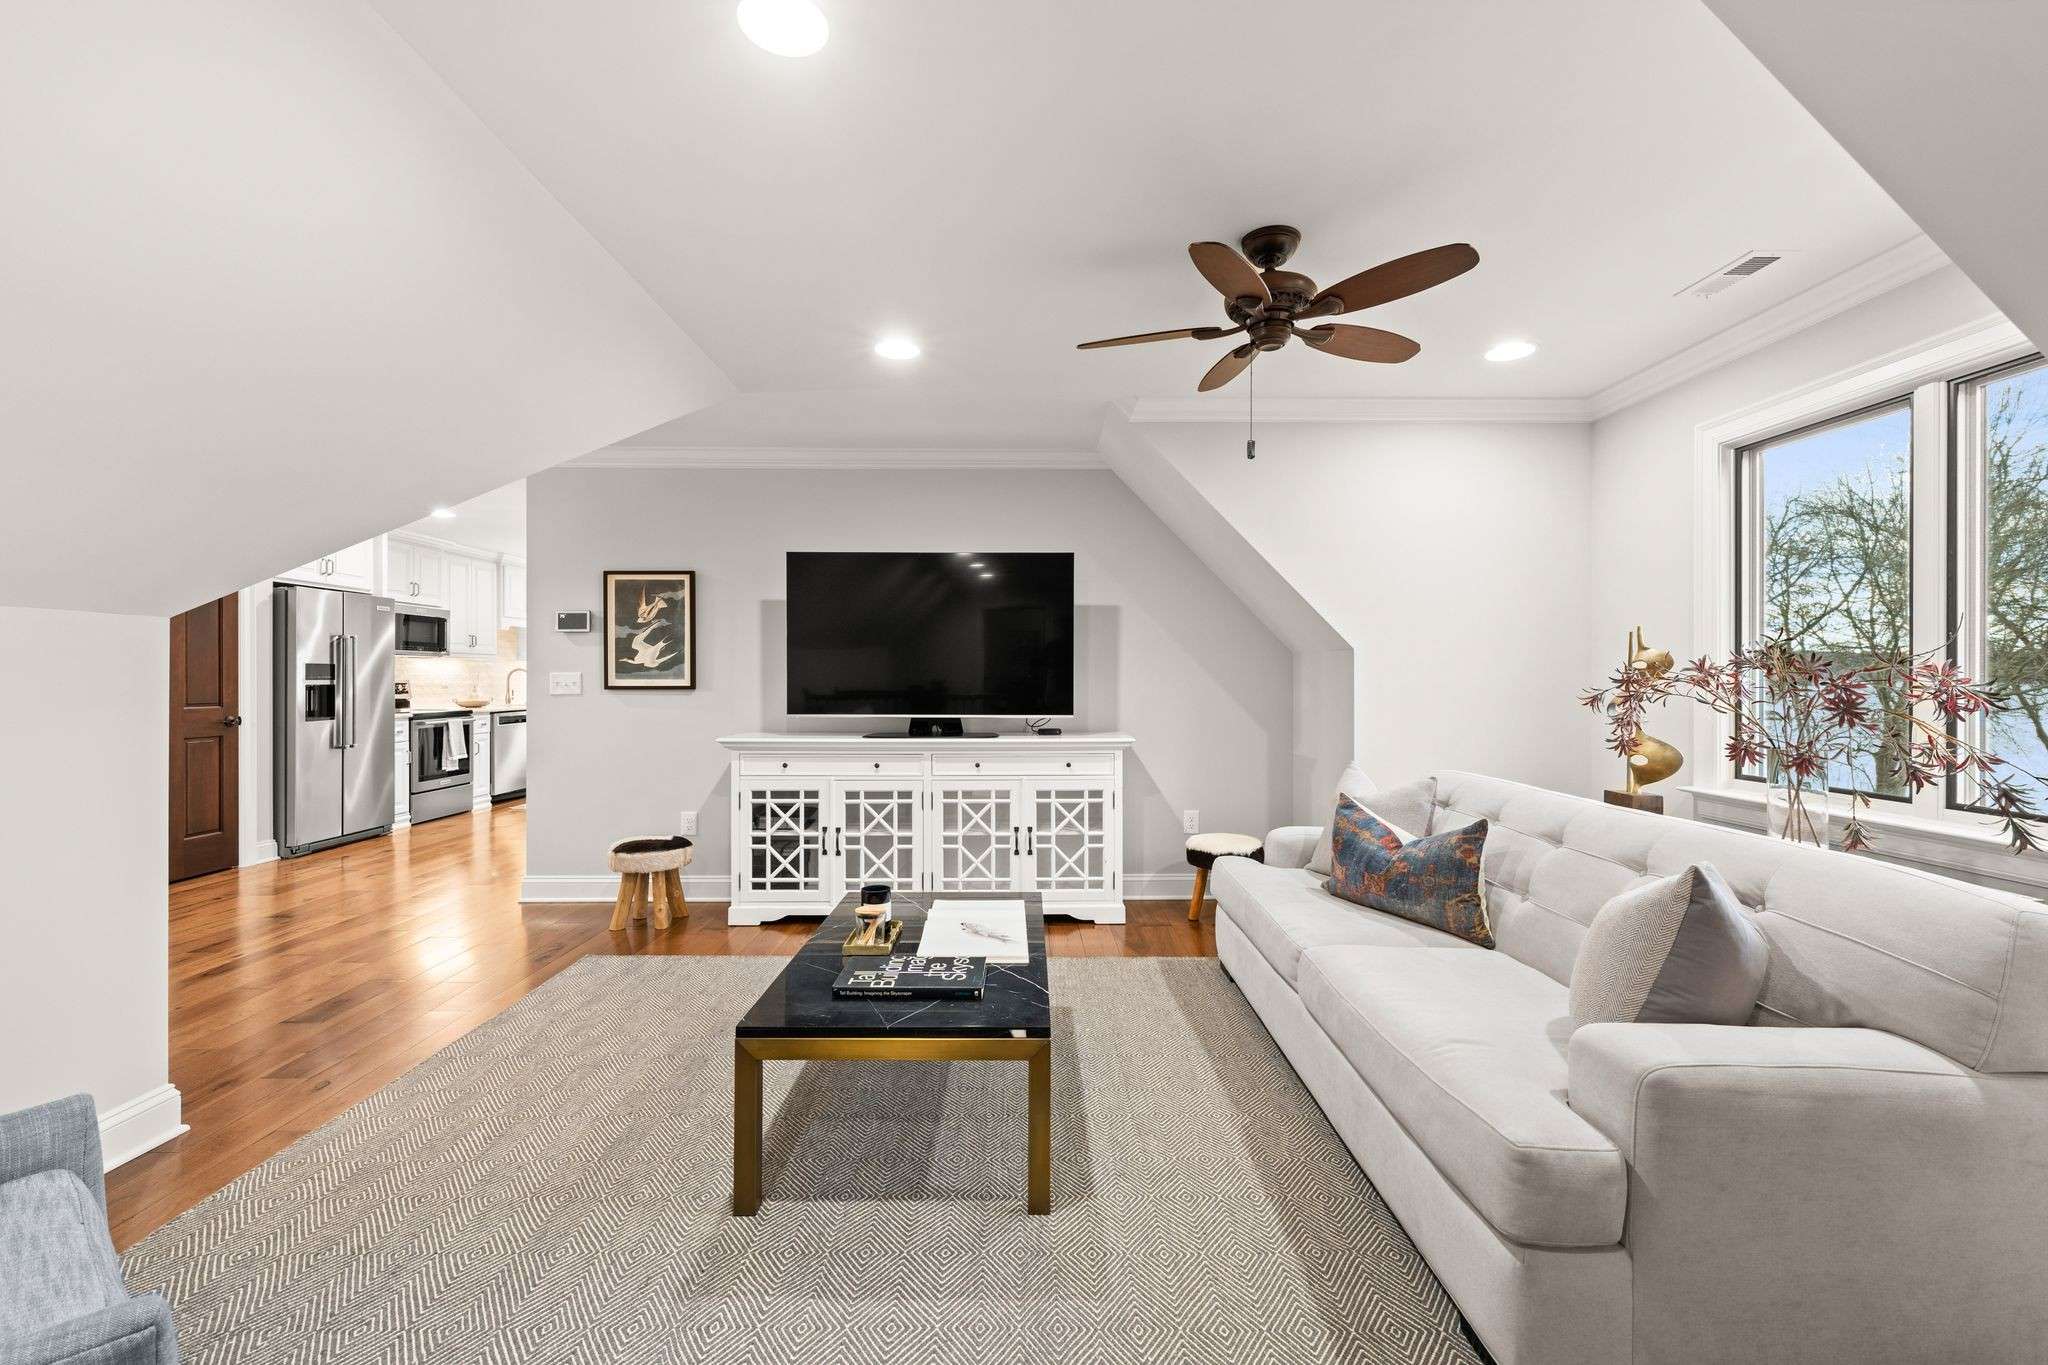 43 of 79. Interior Photo - 846 Armstrong Rd - Photo of Second Level Secondary Living Room, Recessed Lighting, Ceiling fan